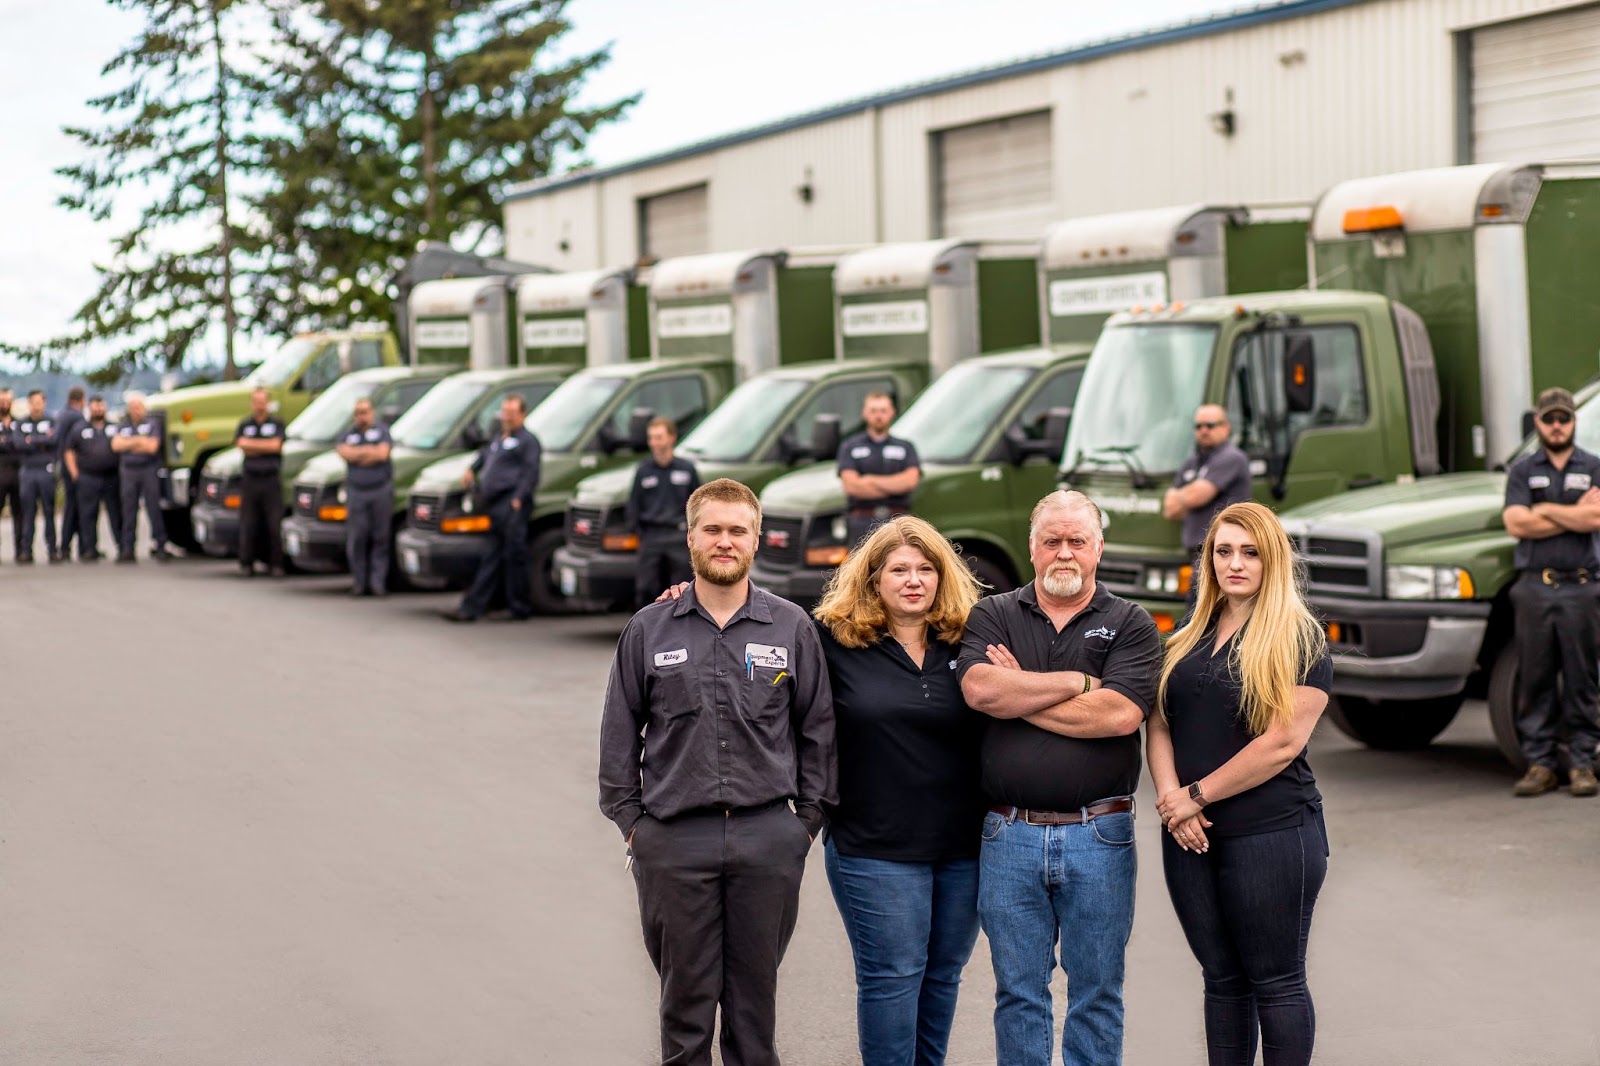 The Equipment Experts, Inc. staff in the foreground with their forklift technicians in the background lined up in a row against fleet vehicles